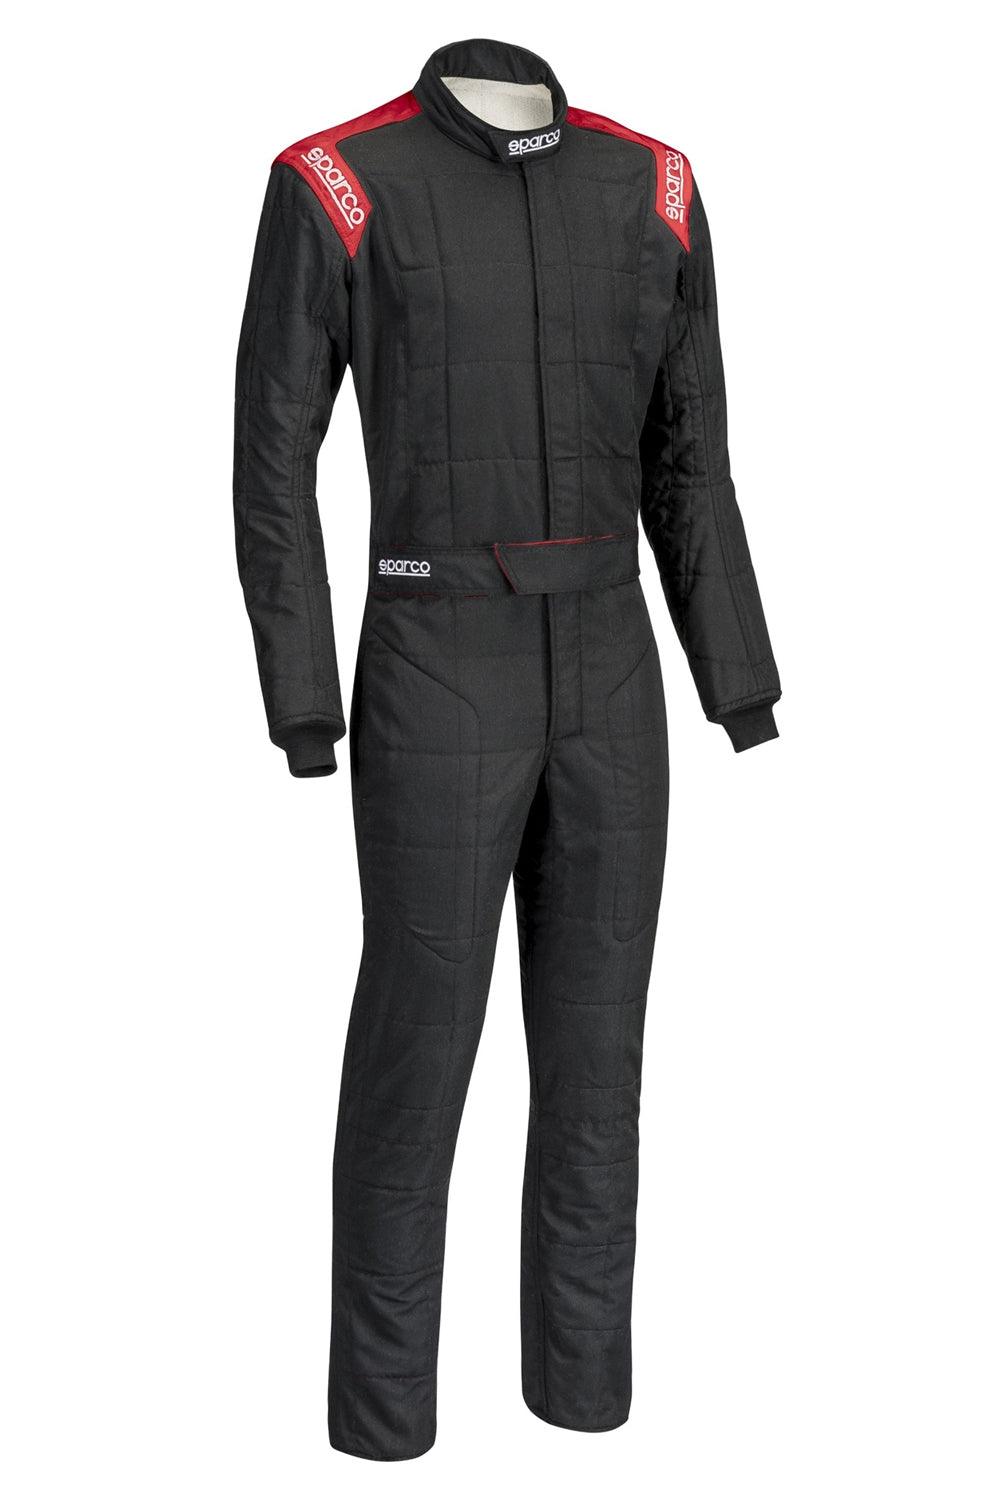 Suit Conquest Boot Cut Blk/Red XX-Large - Burlile Performance Products